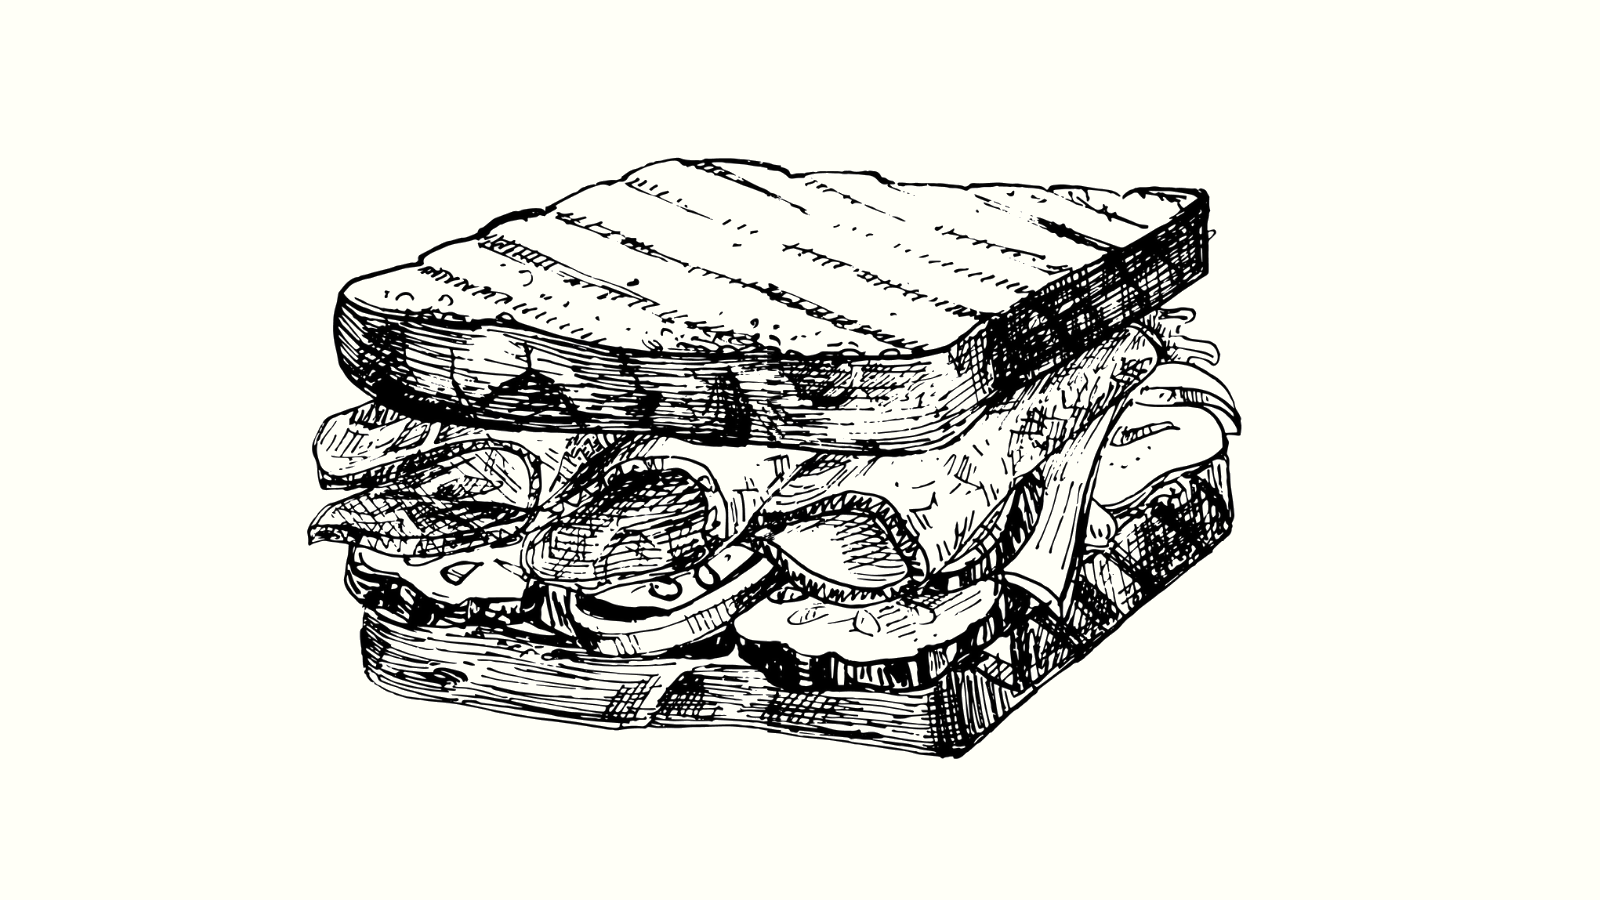 A black and white drawing of a sandwich.